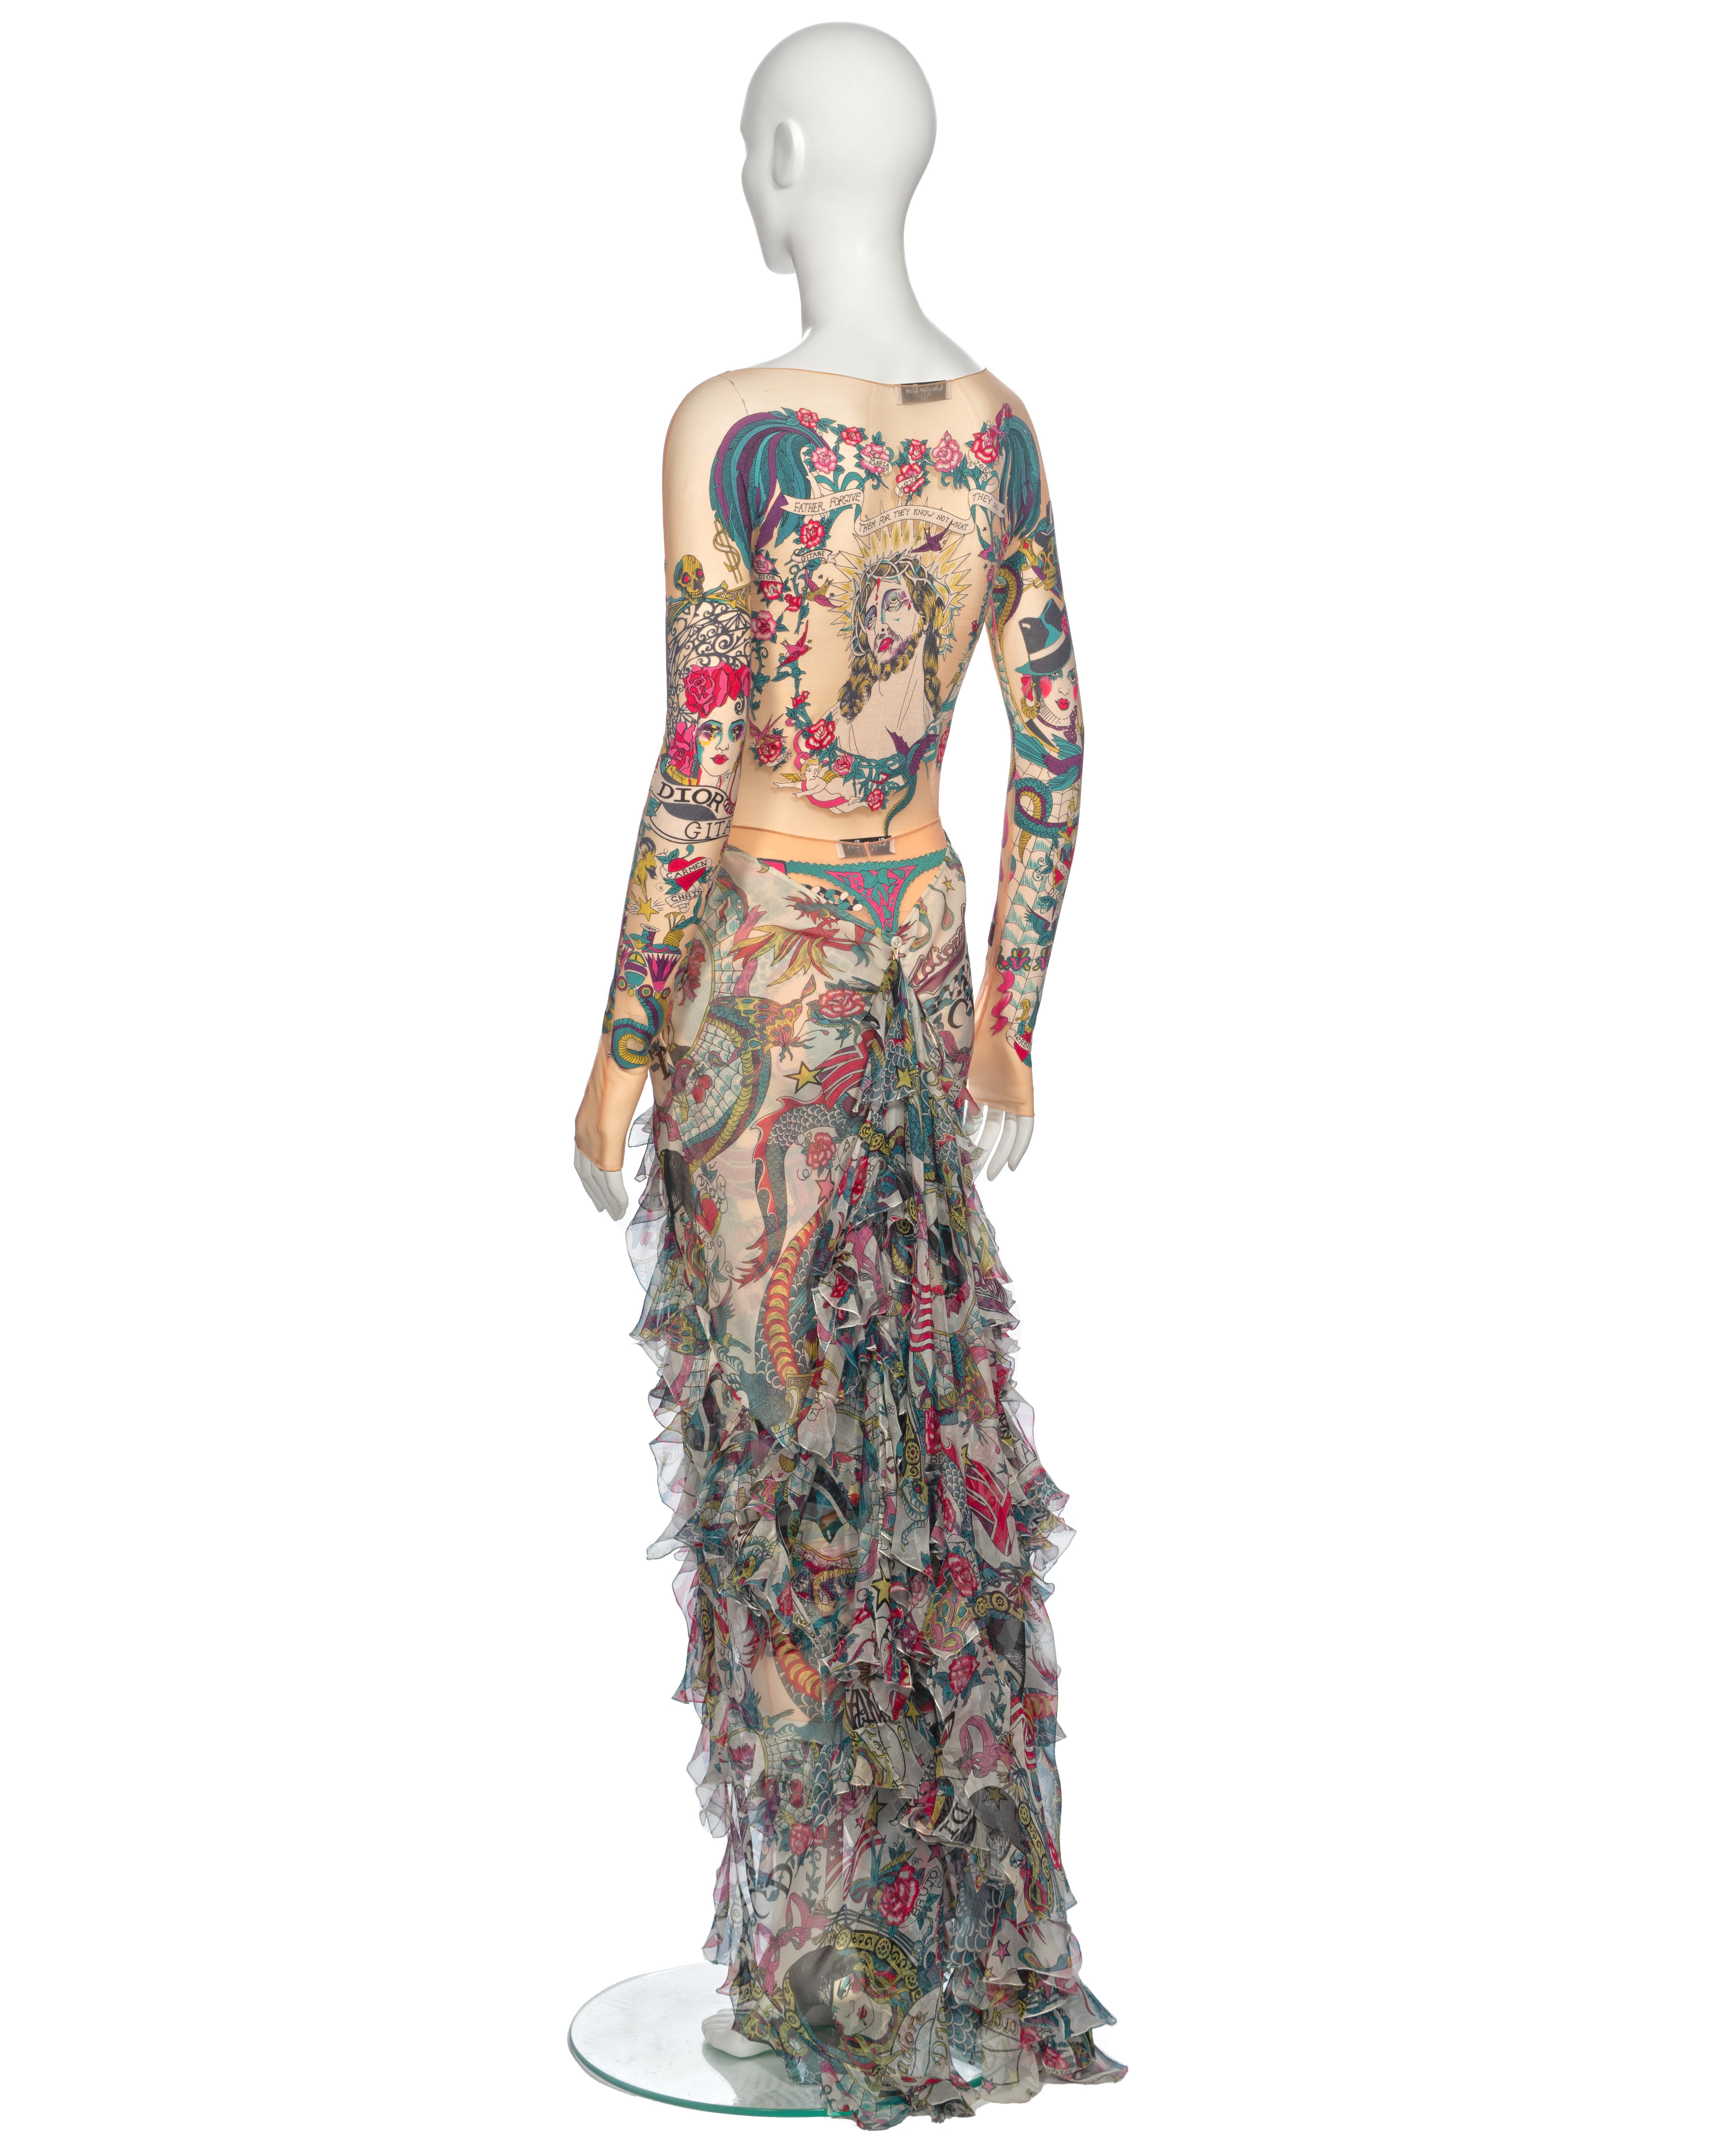 Christian Dior by John Galliano Tattoo Print Body, Leggings and Skirt, ss 2004 For Sale 8